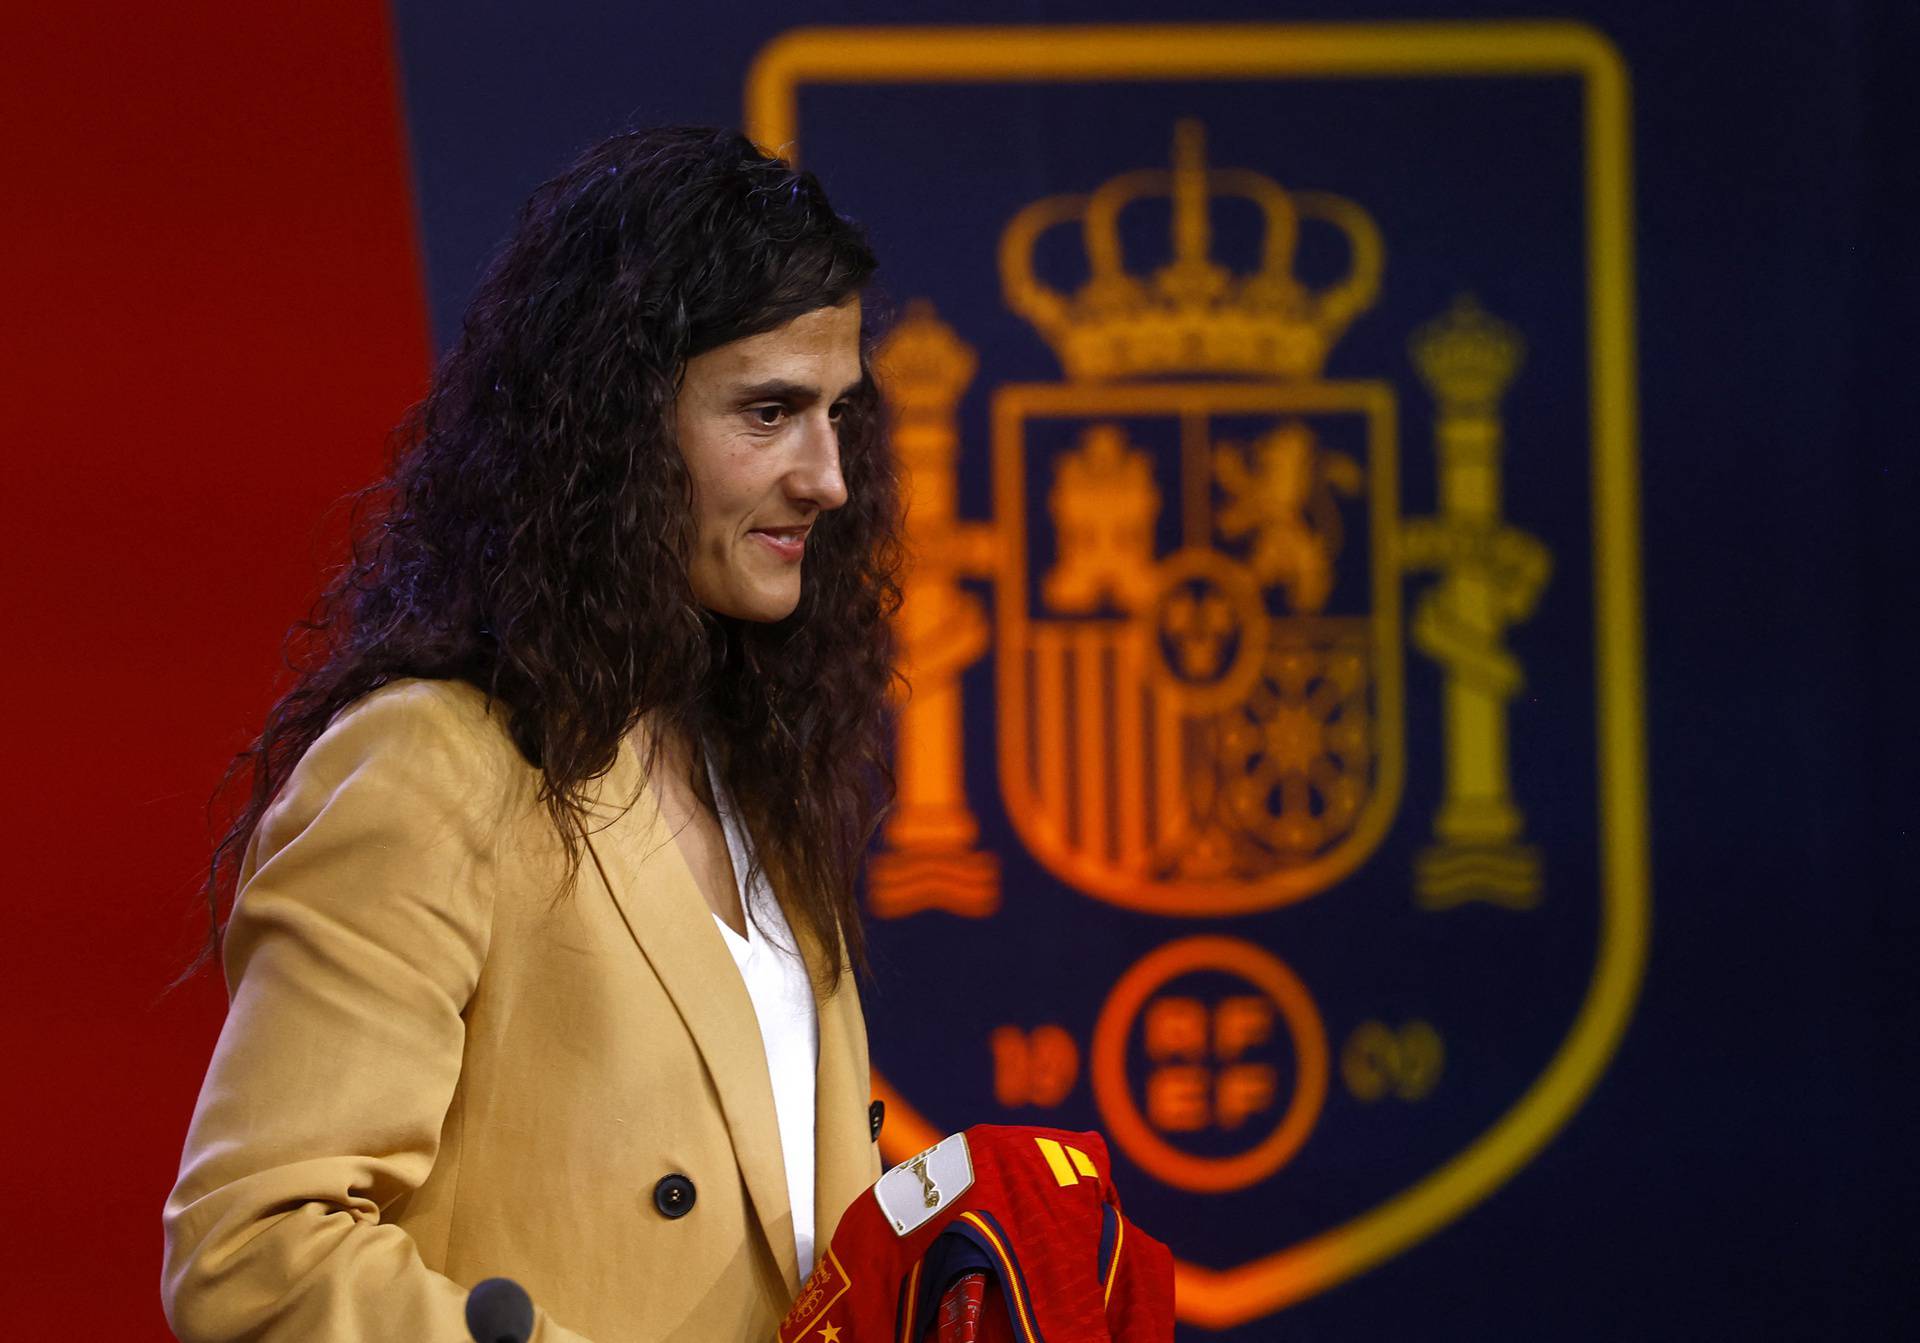 Spain Press Conference